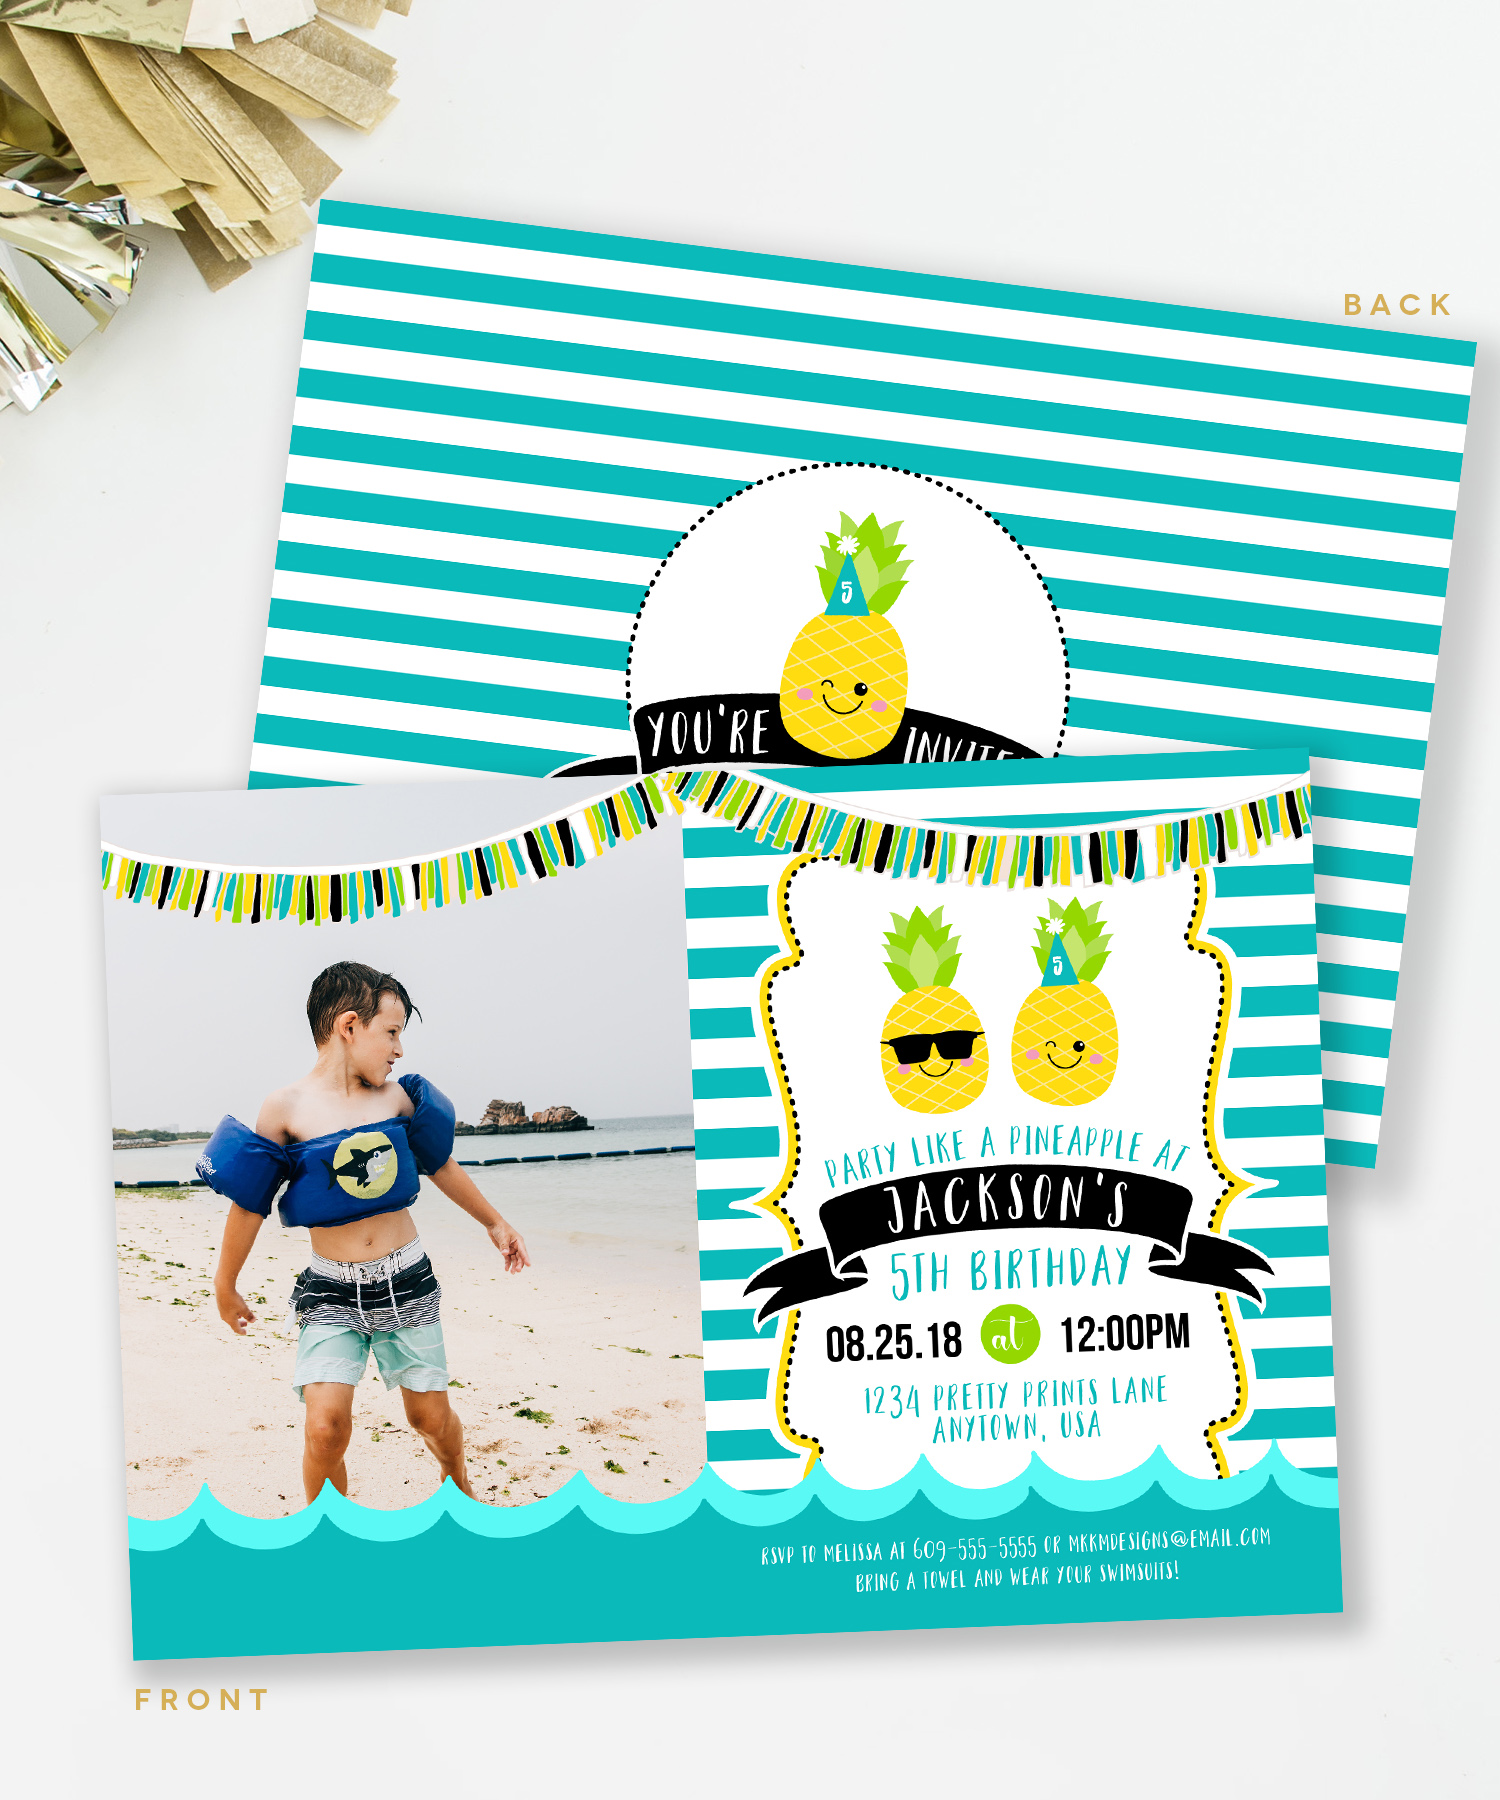 Pineapple party invites from mkkmdesigns